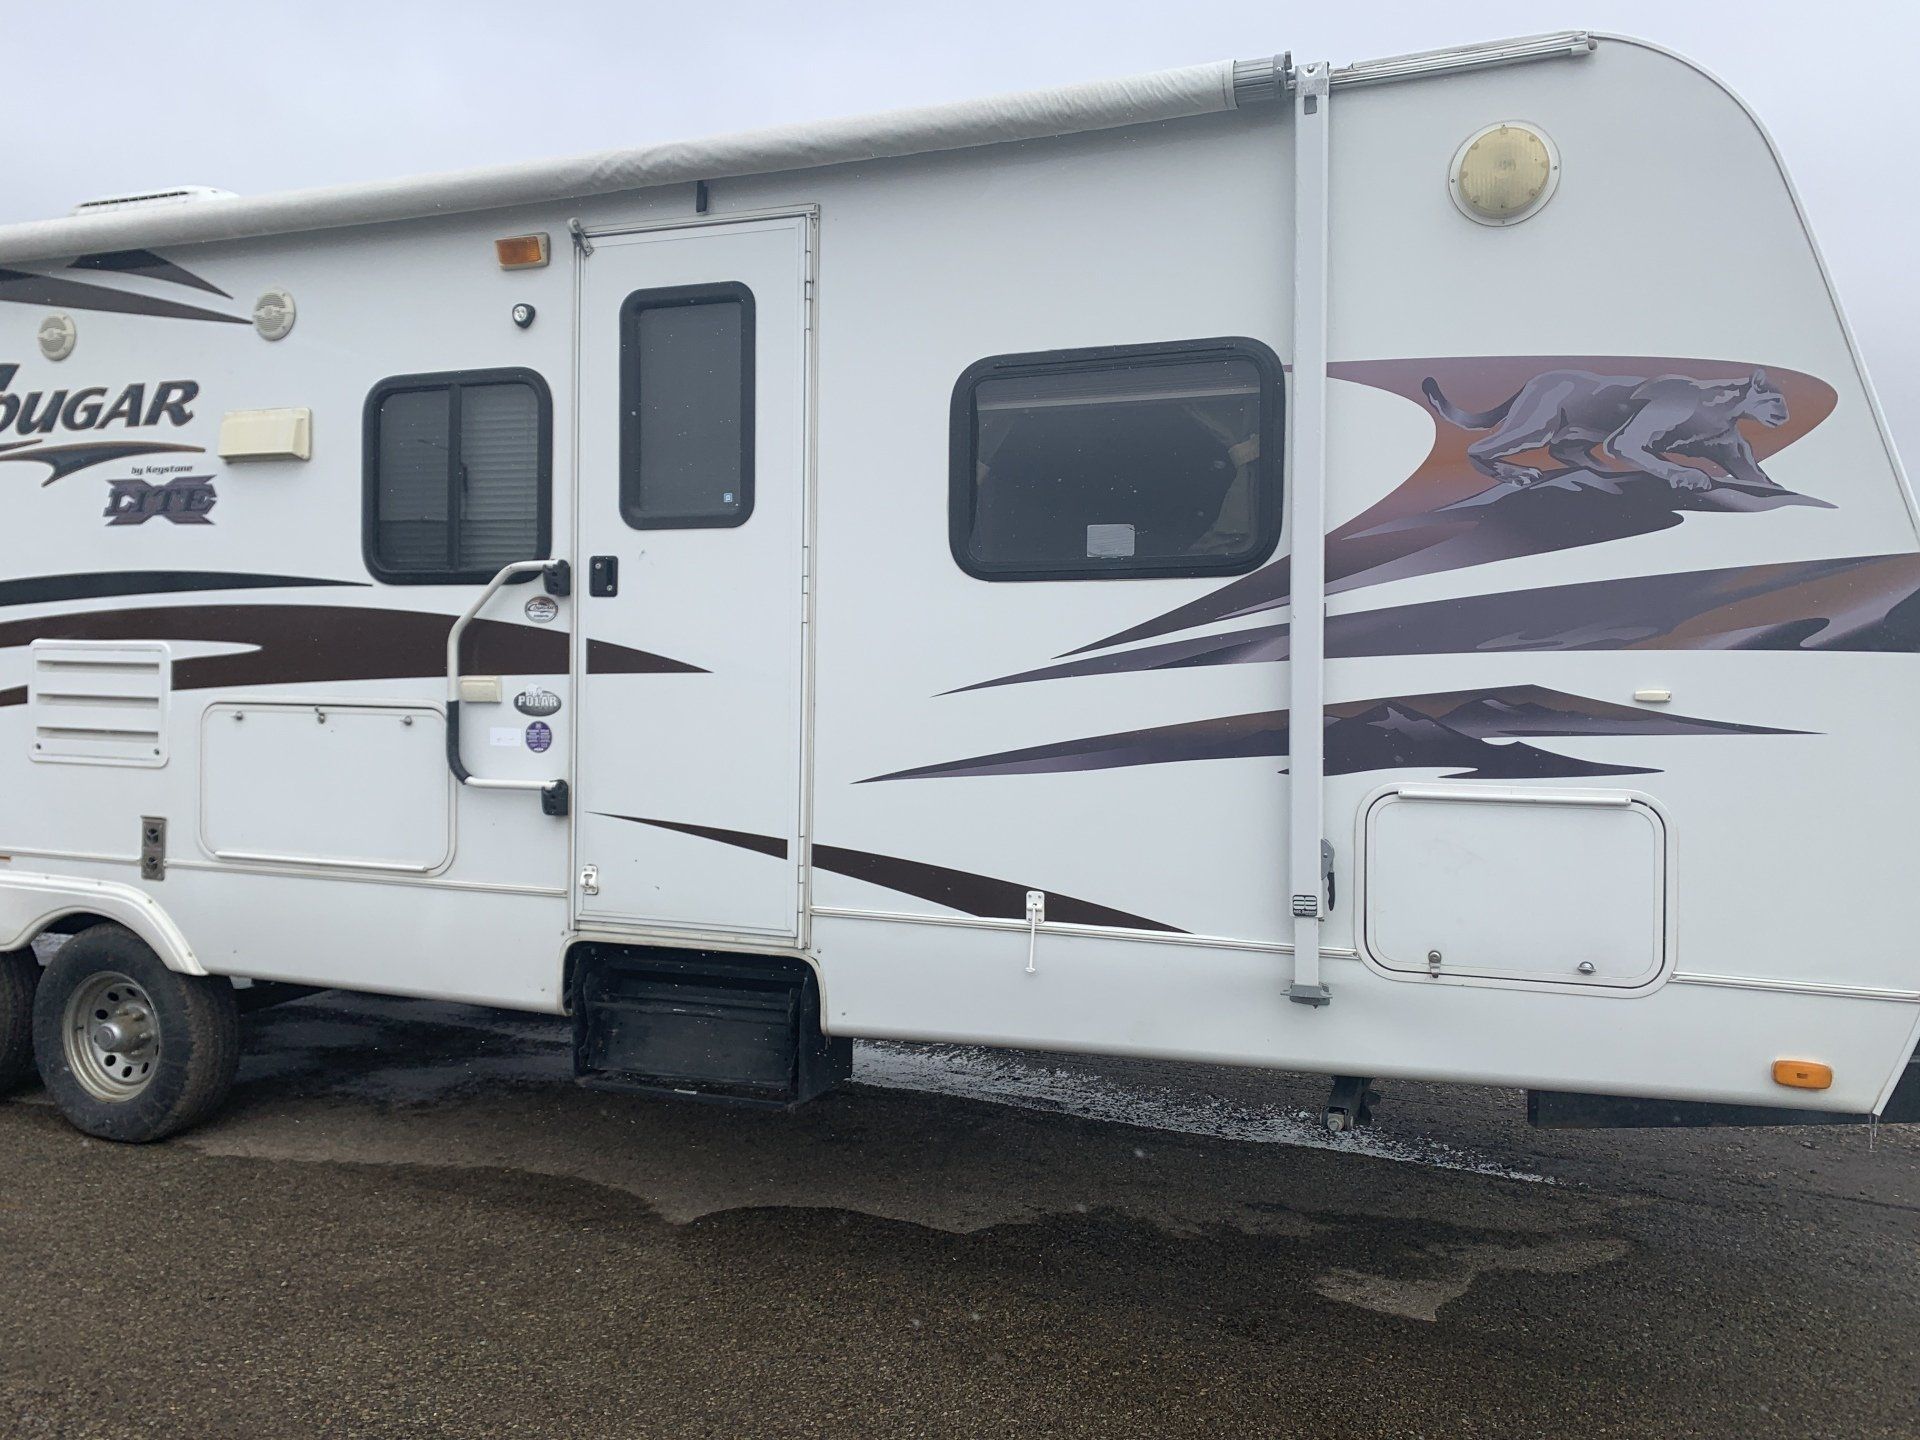 2020 - Alberta's Worst RV Decal Contest - Grand Prize Winner - Before & After - Pic 5